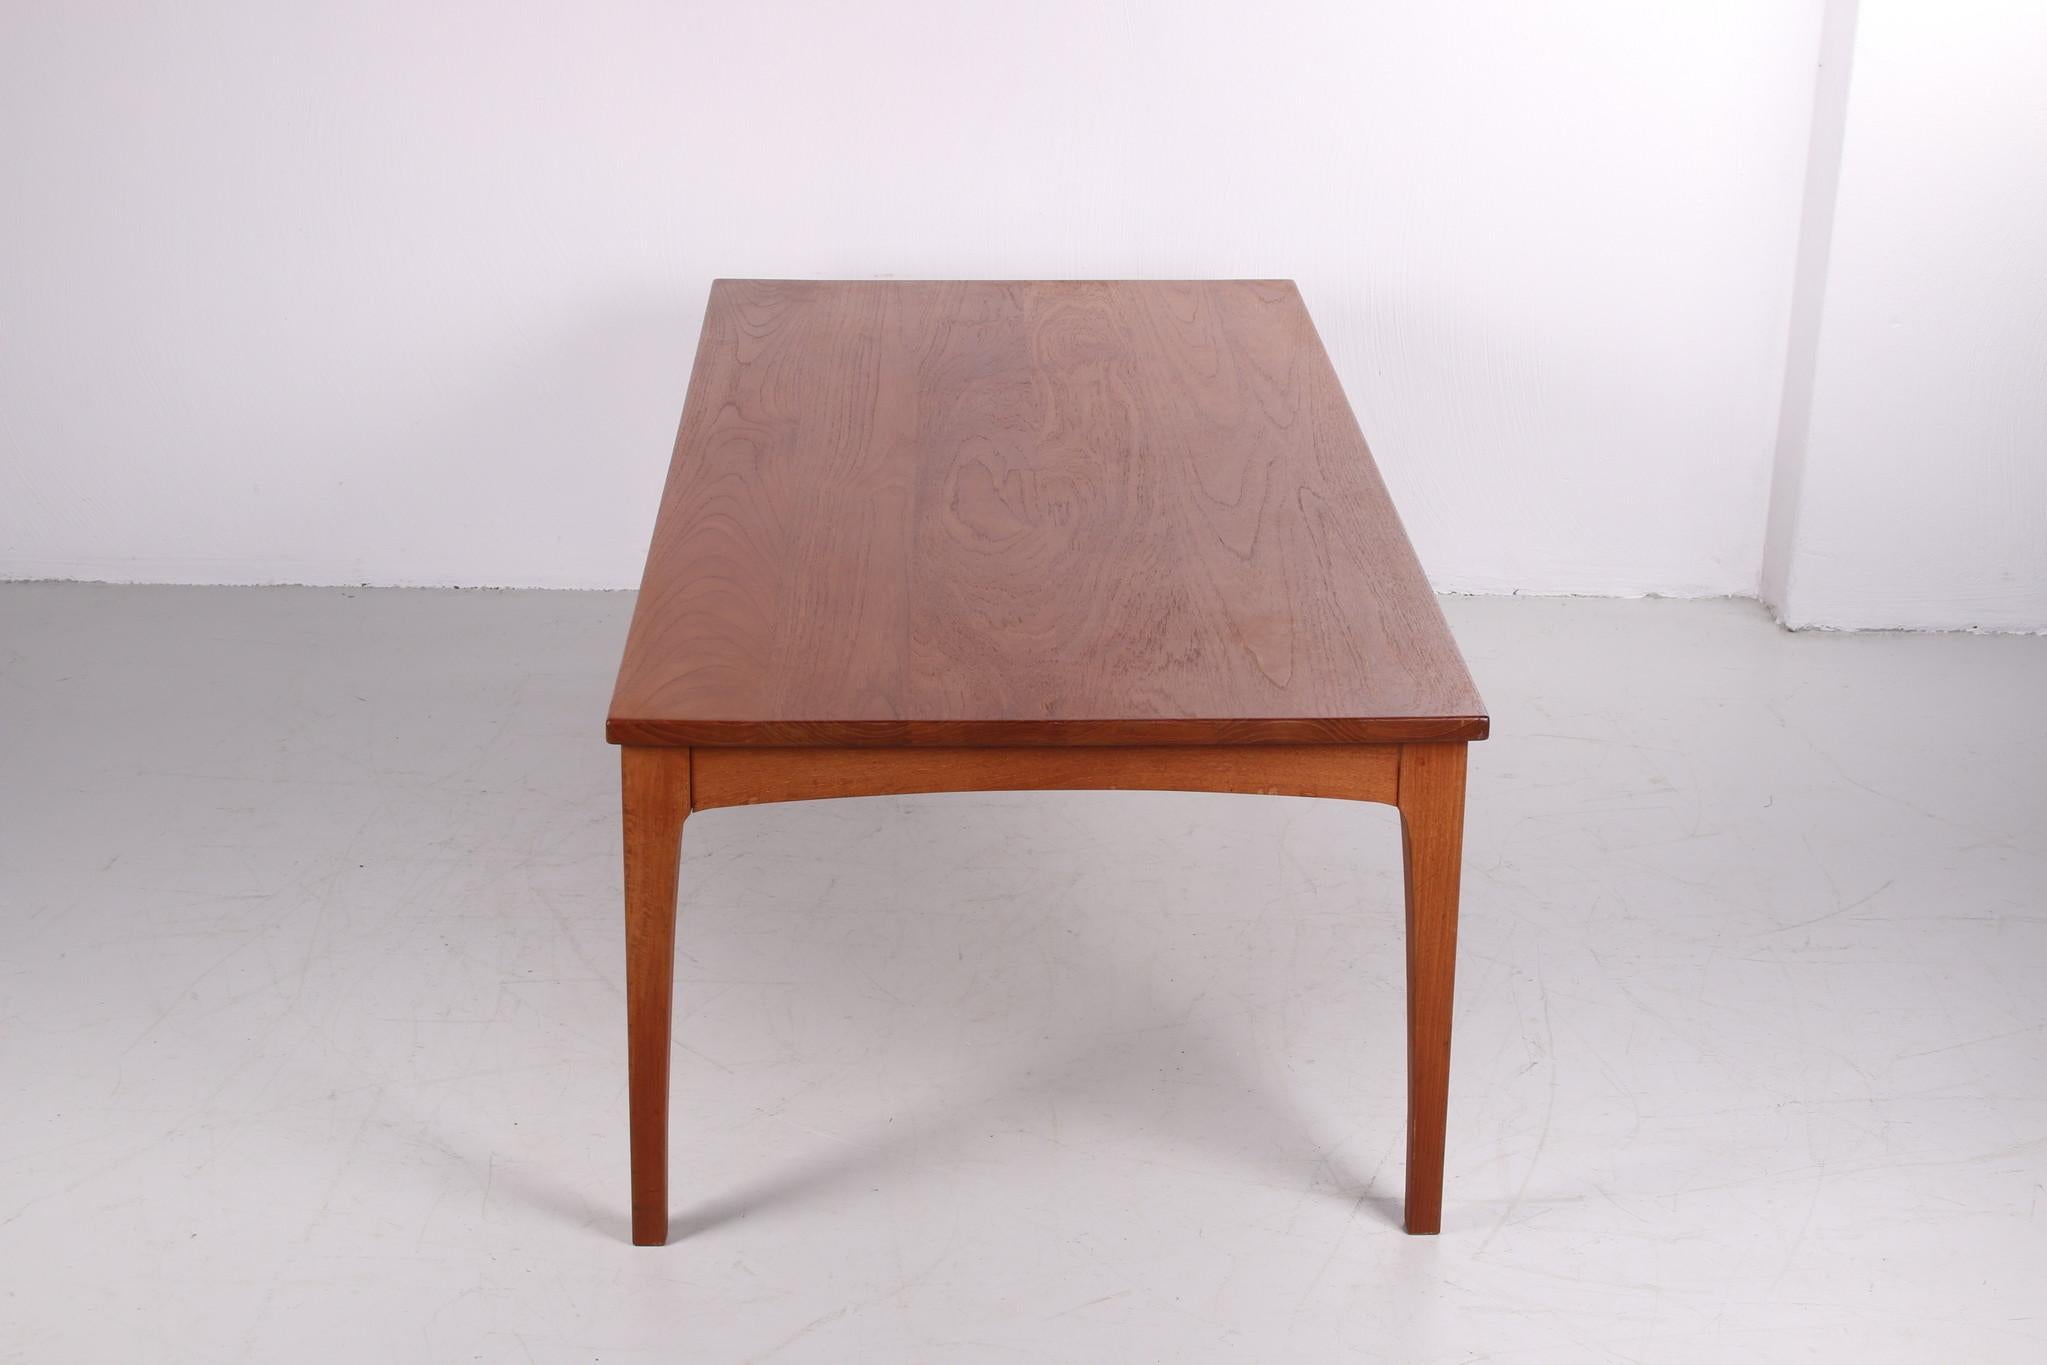 Danish Design Coffee Table from solid Teak design by Niels Bach 1960 For Sale 2